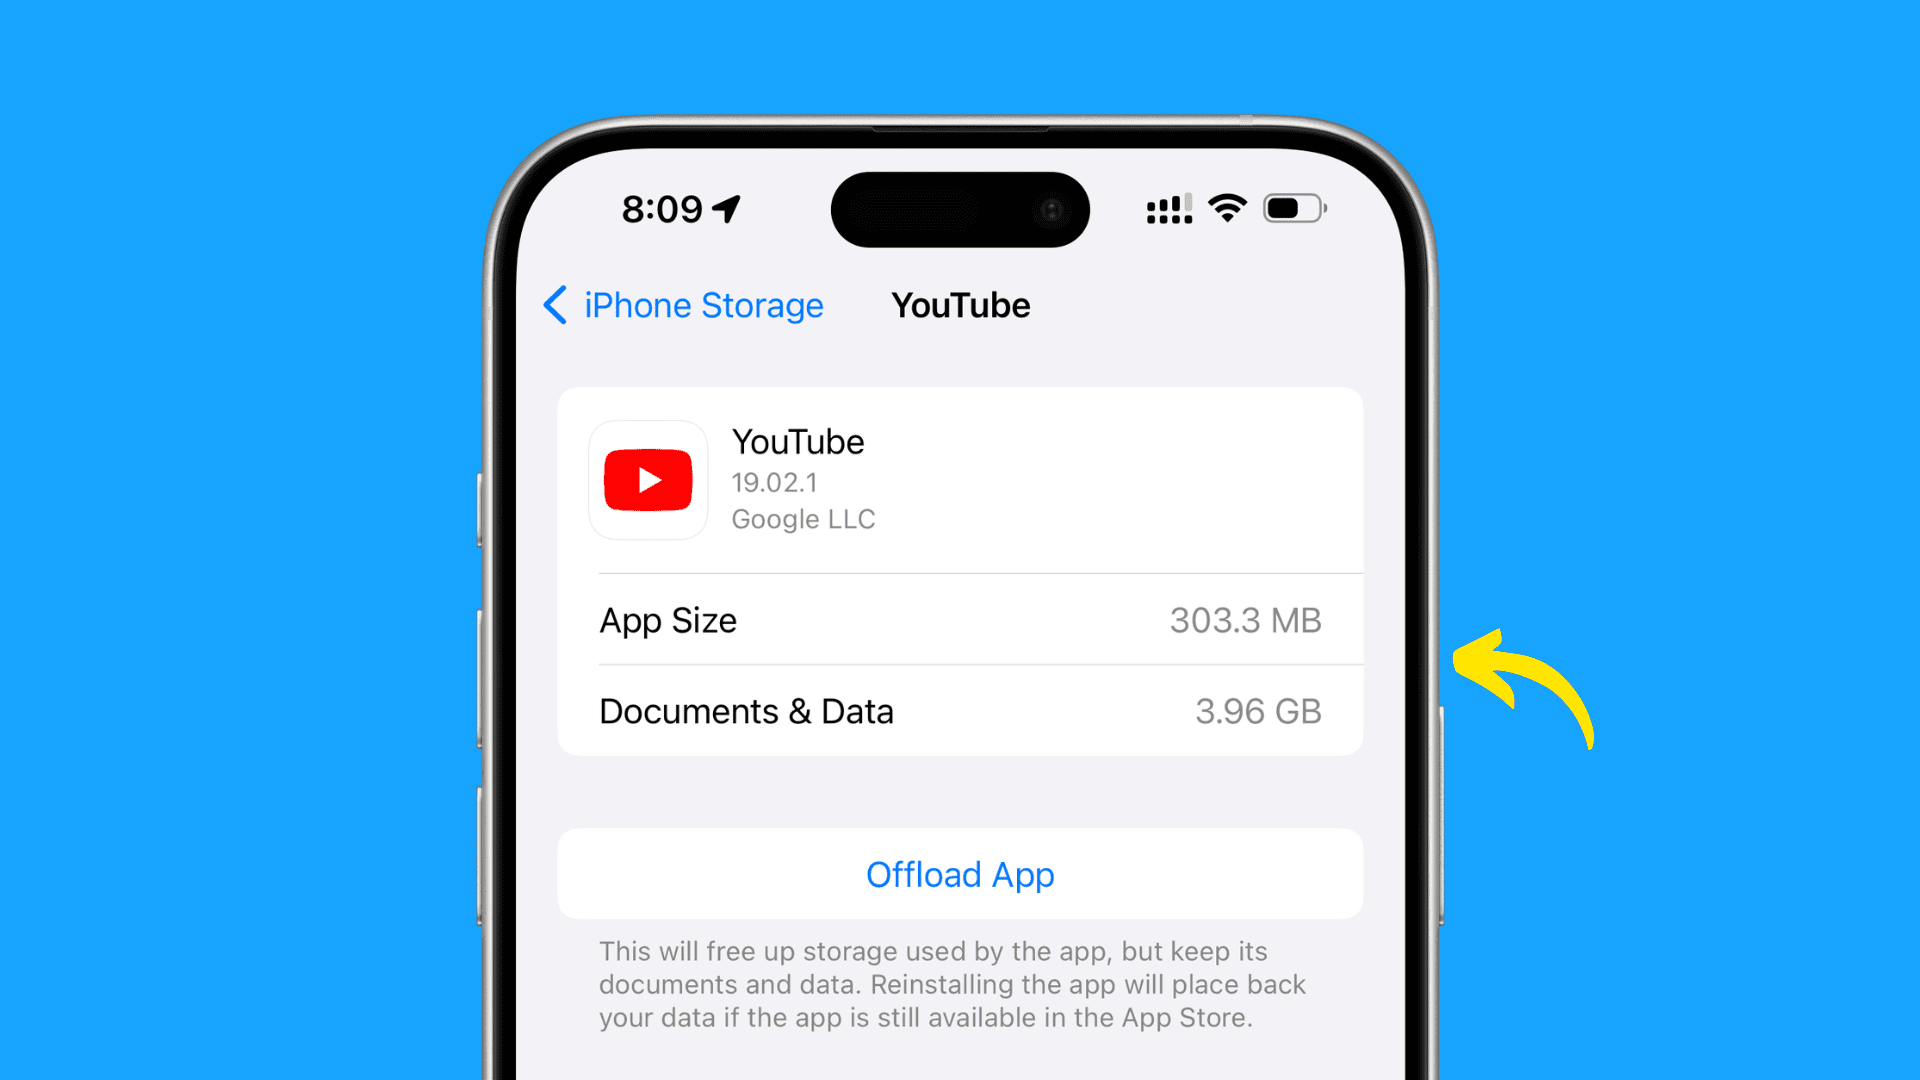 iPhone Storage settings screen showing the app size and documents and data size for the YouTube app